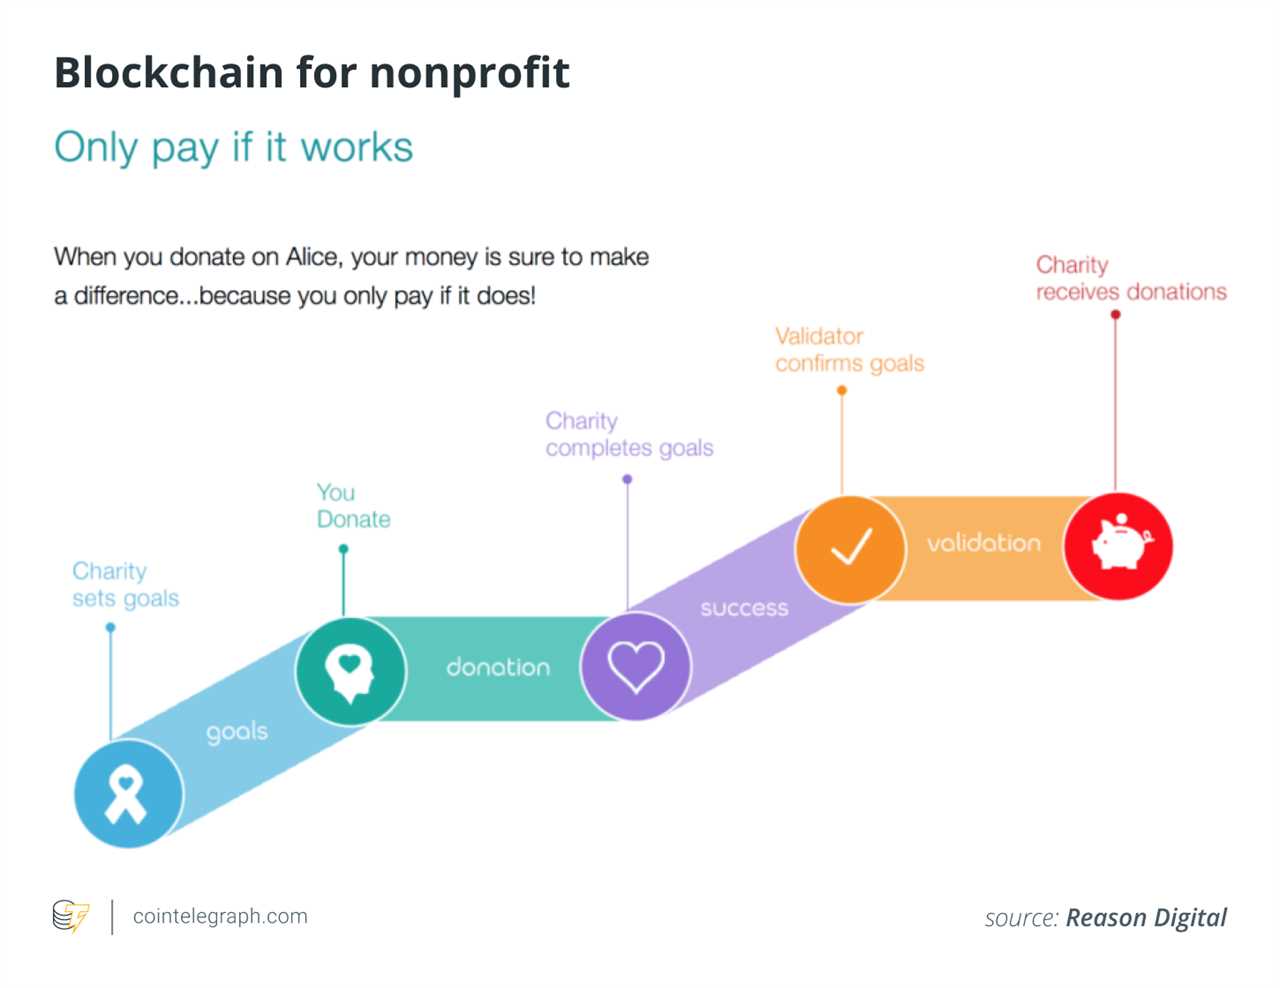 It’s time for the philanthropic sector to embrace digital currencies